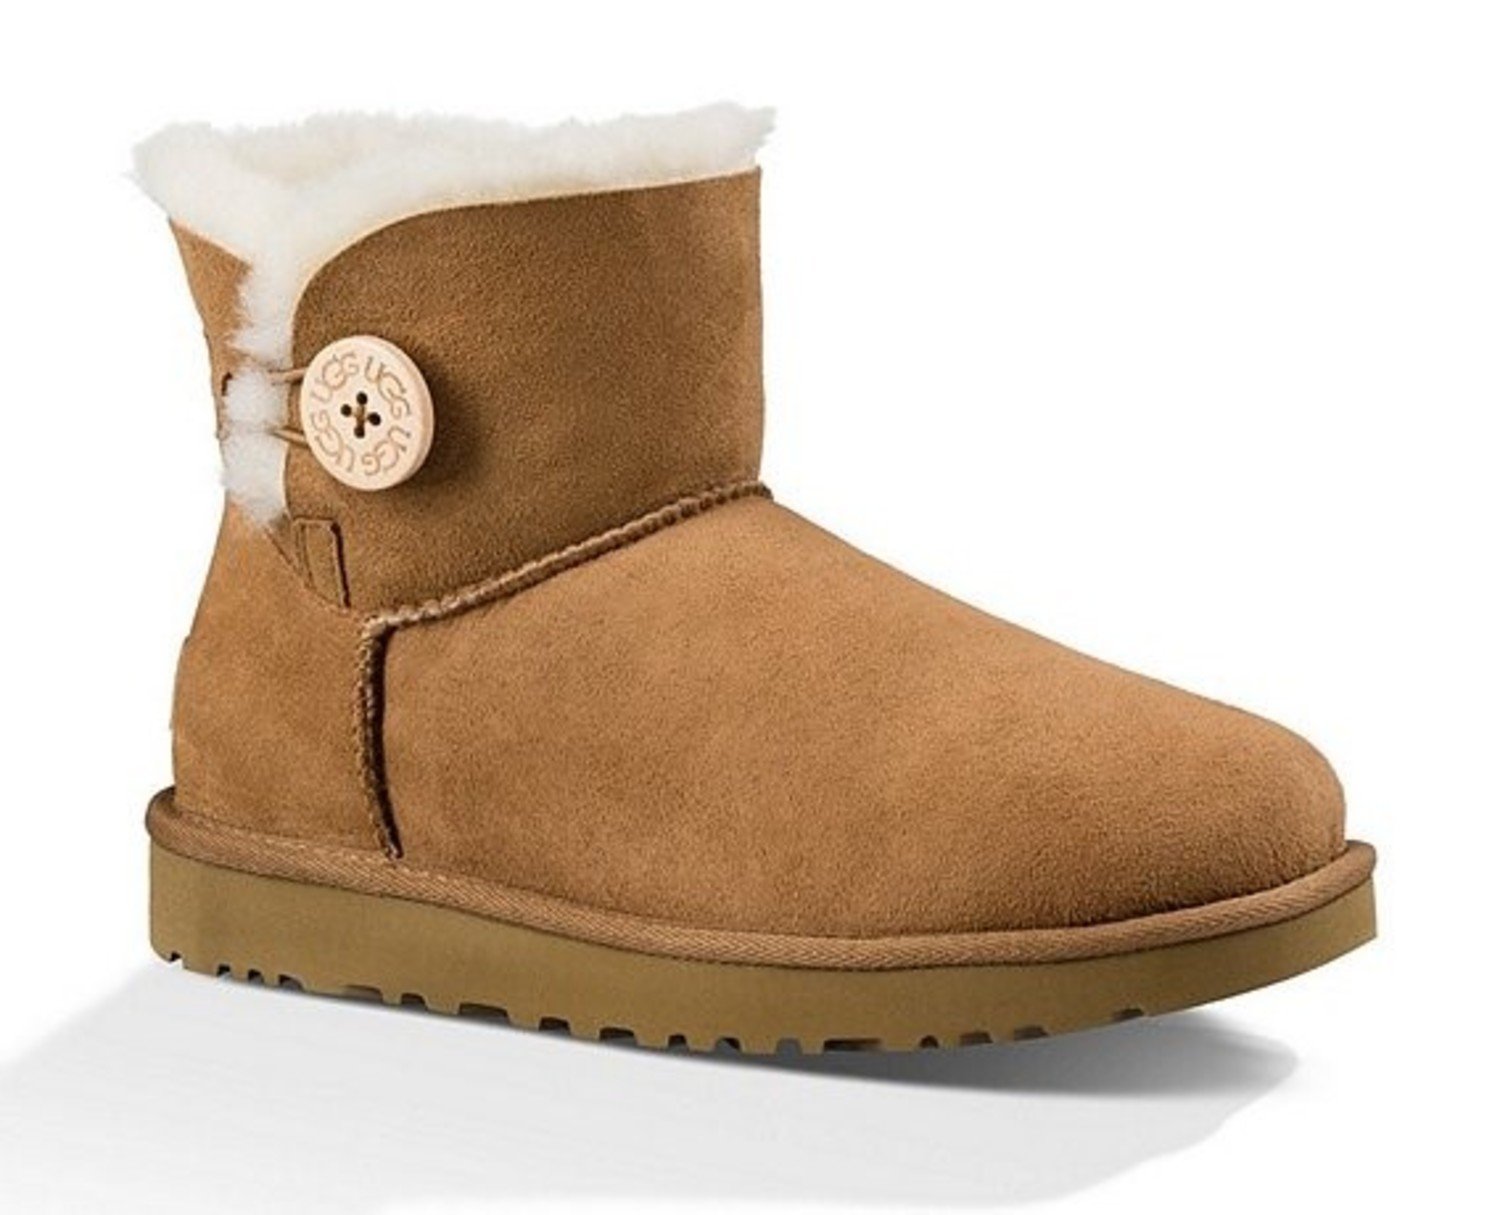 UGG Women's Bailey Bow II Chestnut Boot - Continental Shoes